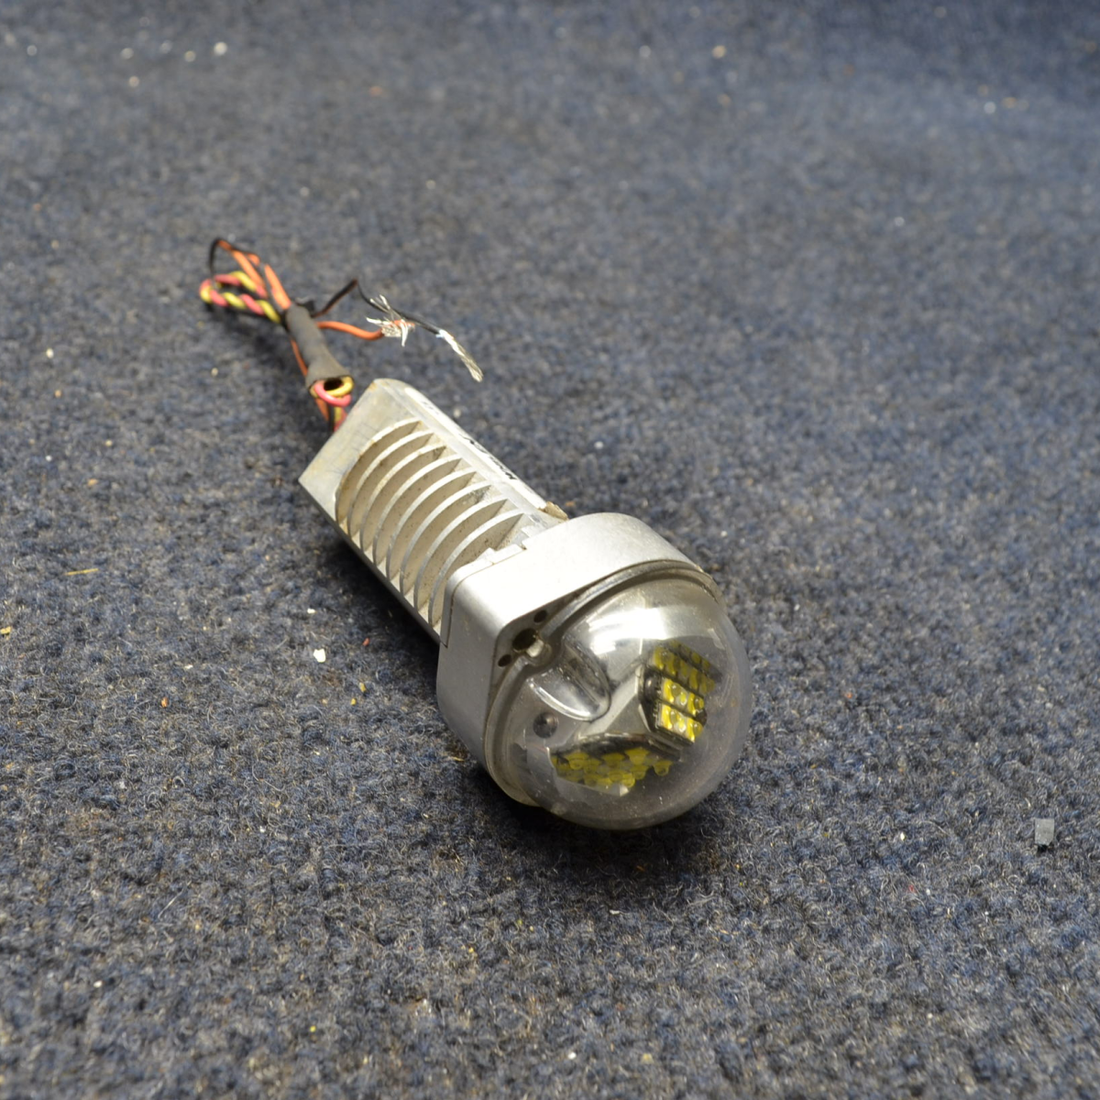 Used aircraft parts for sale, 01-0771774V01 PIPER PA28-140 WHELEN TAIL LIGHT ORION 12V